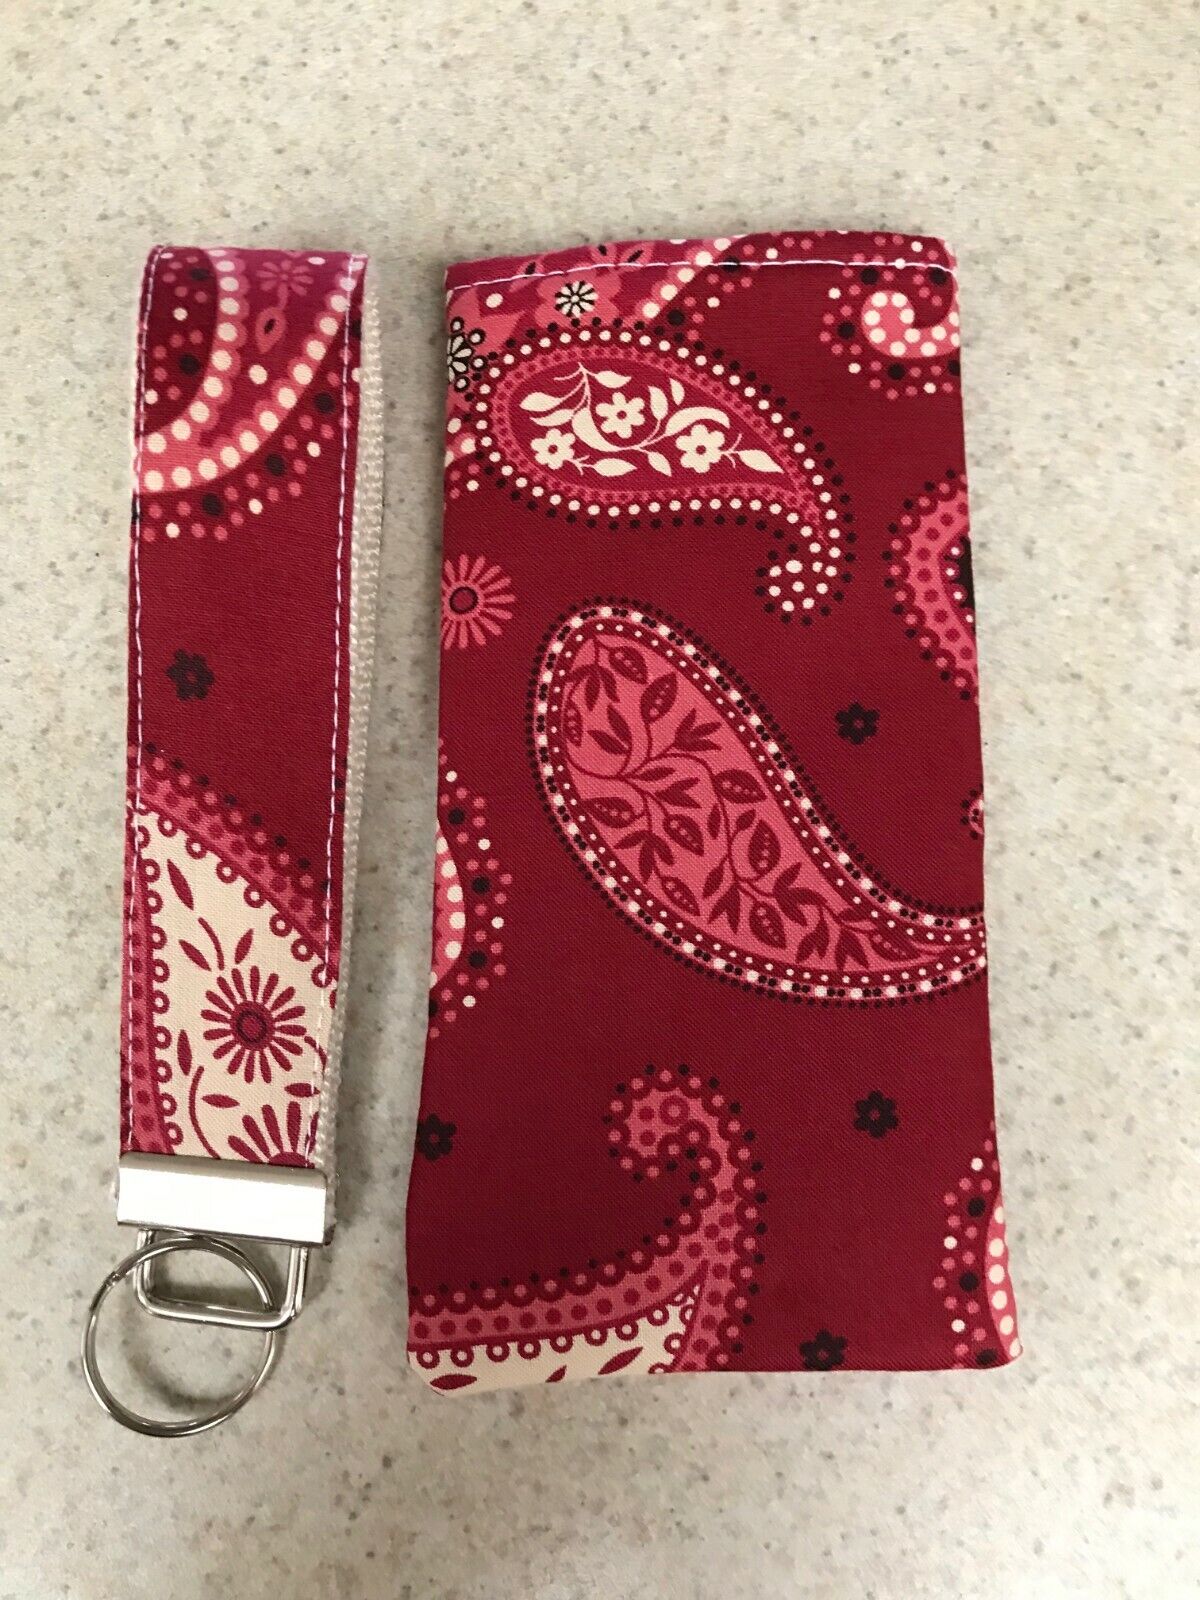 Sunglass Case & Wristlet Style Key Fob - Classic Mesa Red - Gift